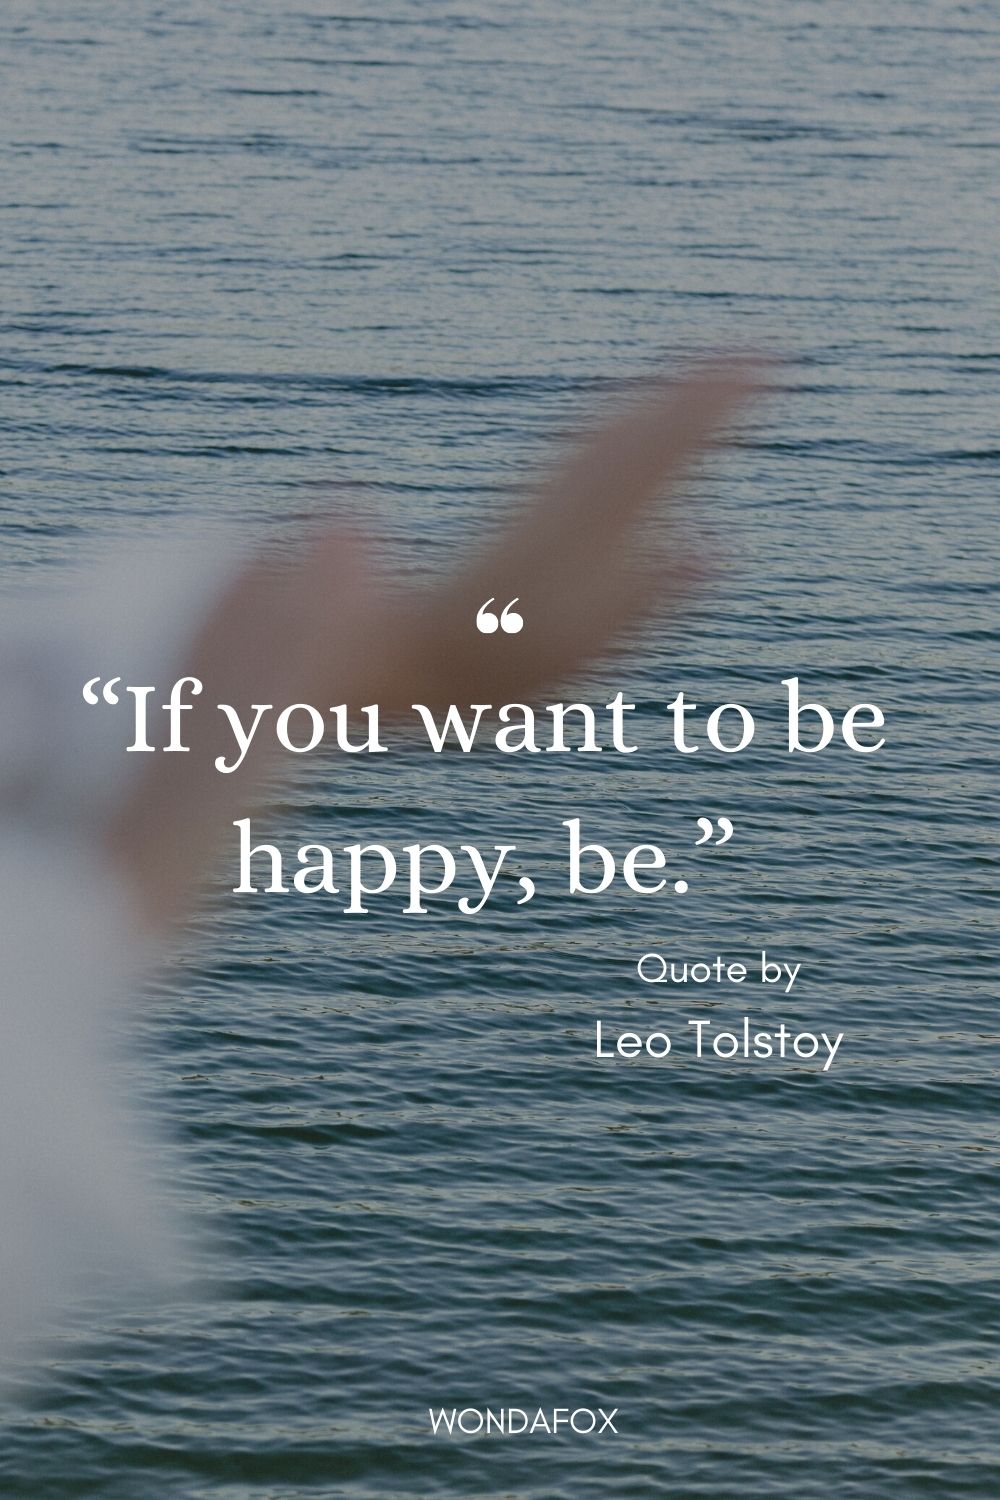 “If you want to be happy, be.”
Leo Tolstoy